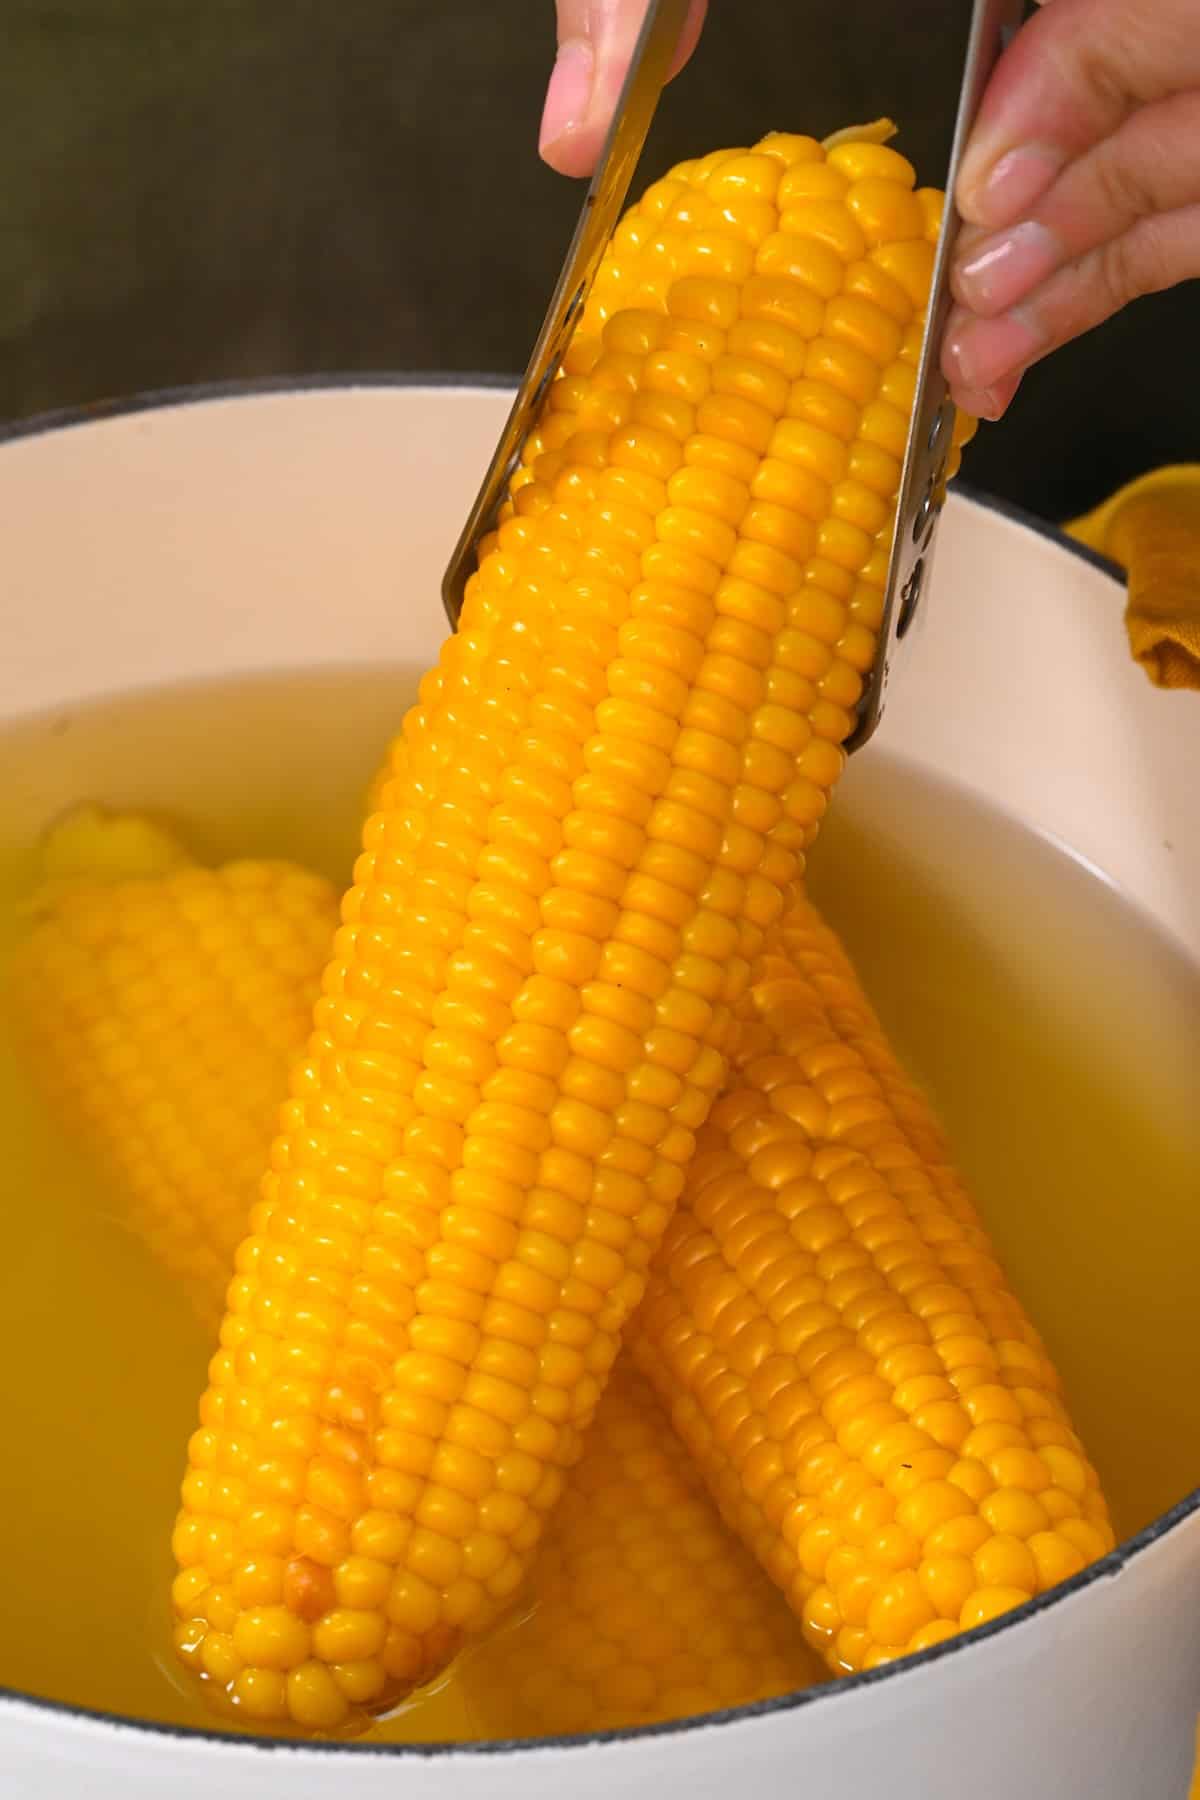 Taking out freshly boiled corn on the cob